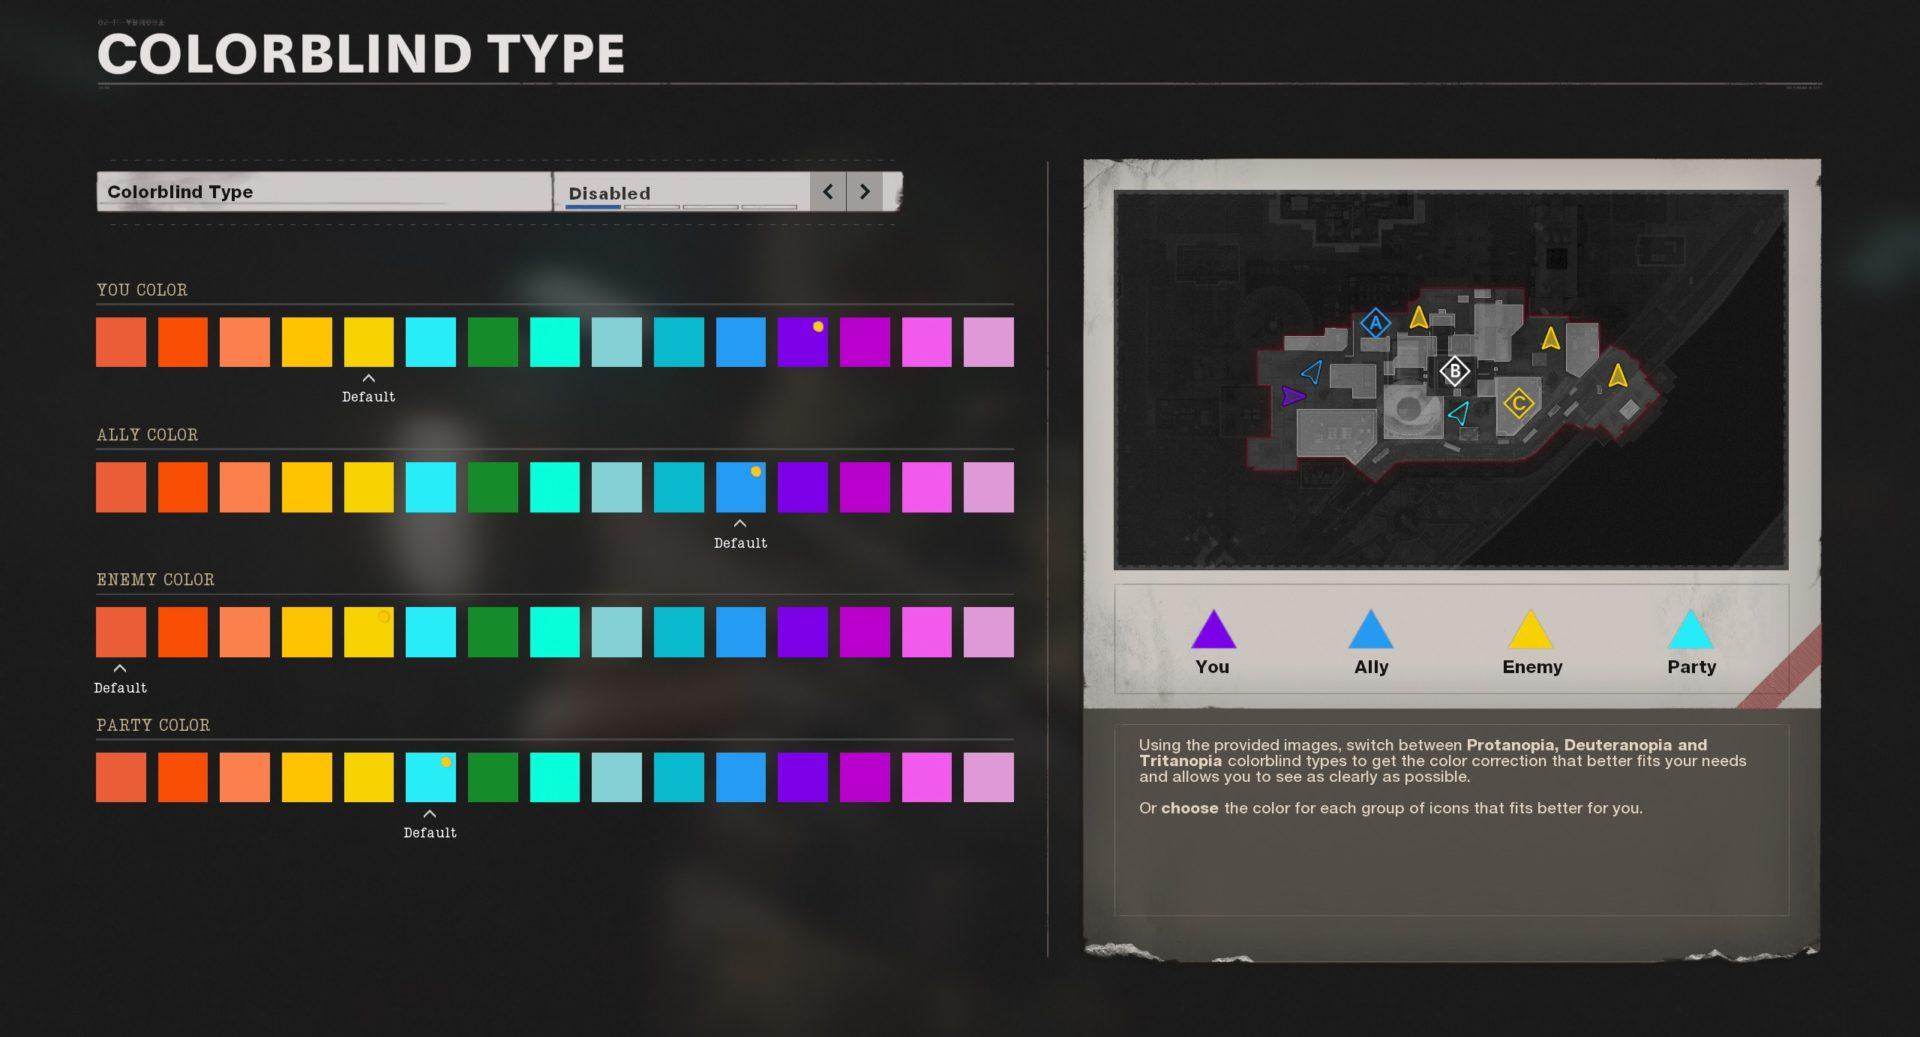 Black Ops Cold War colorblind settings